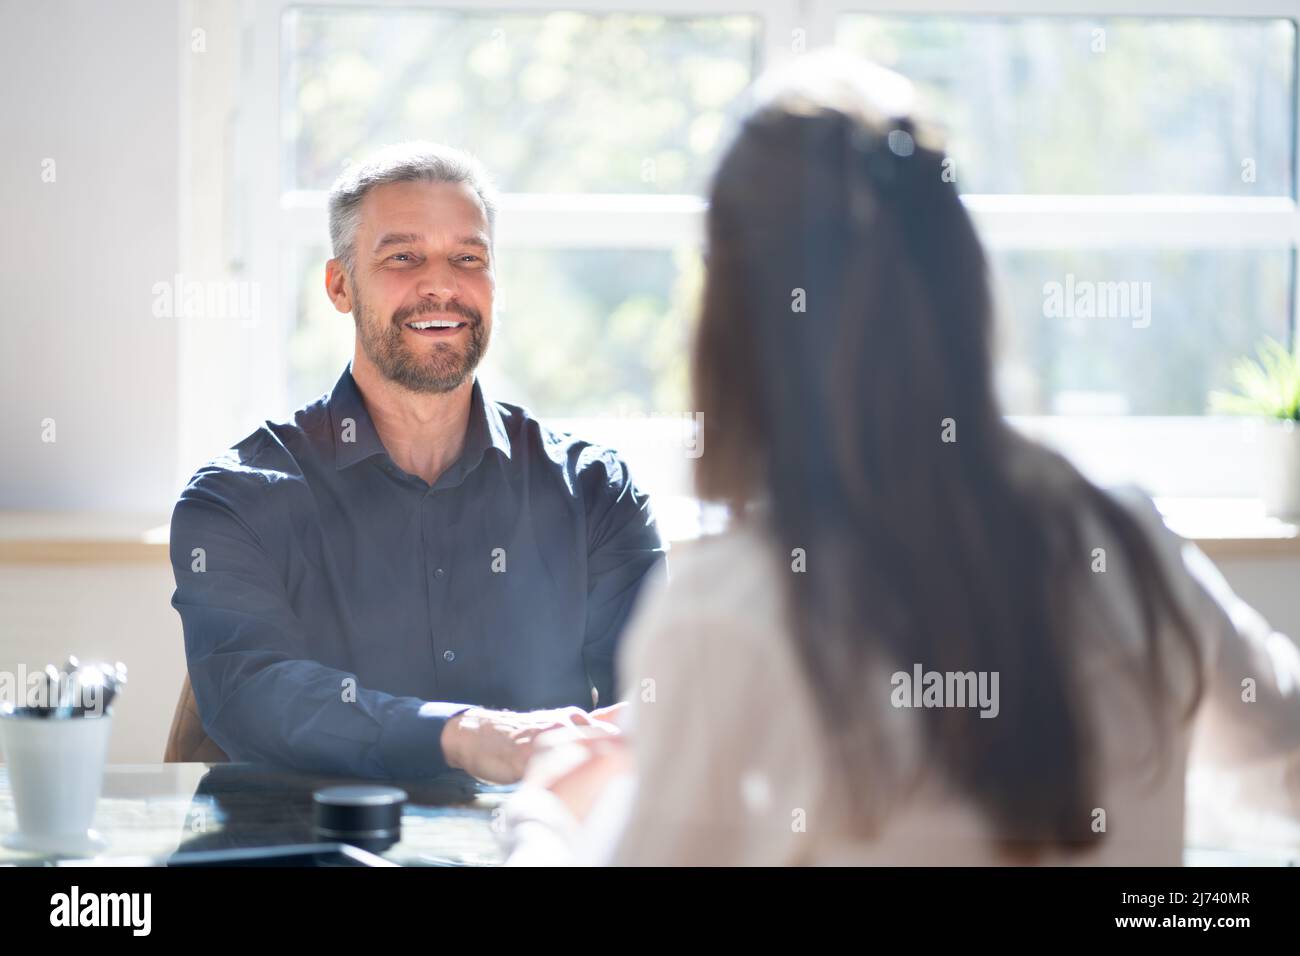 Corporate Law Job Application And Interview. Hiring Meeting Stock Photo